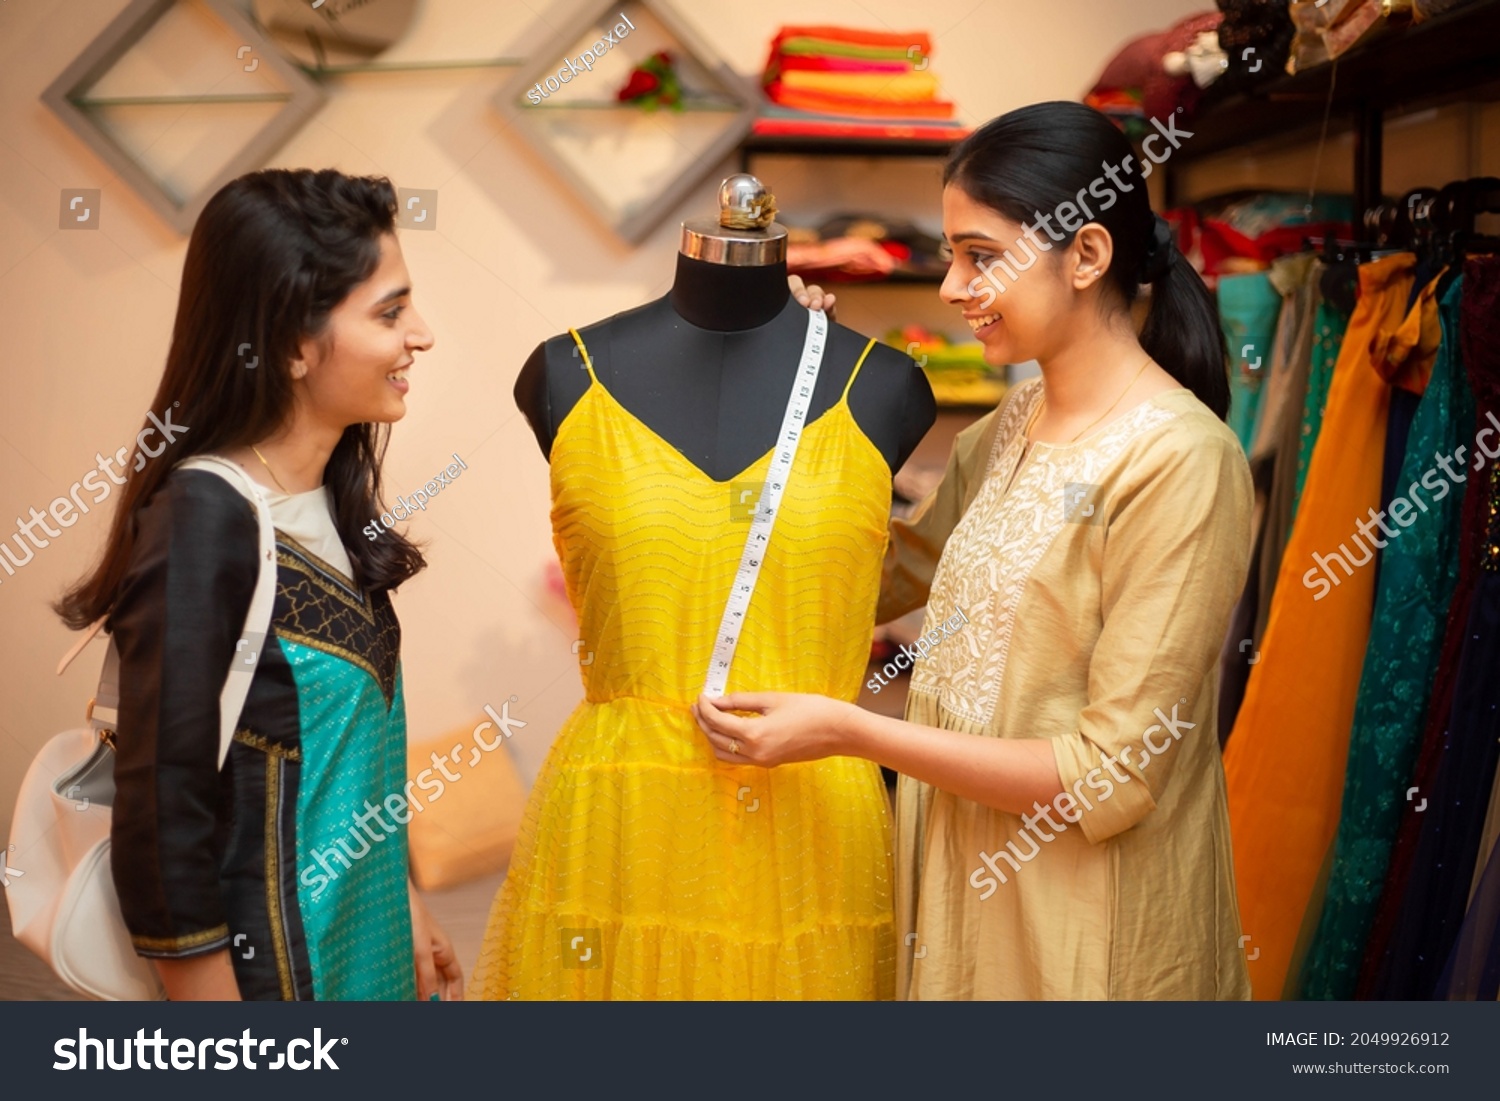 Young happy indian woman,tailor seamstress,smiling fashion designer showing customer or client dress measurements with tape,measuring on mannequin,standing in garment workshop,atelier or studio. #2049926912